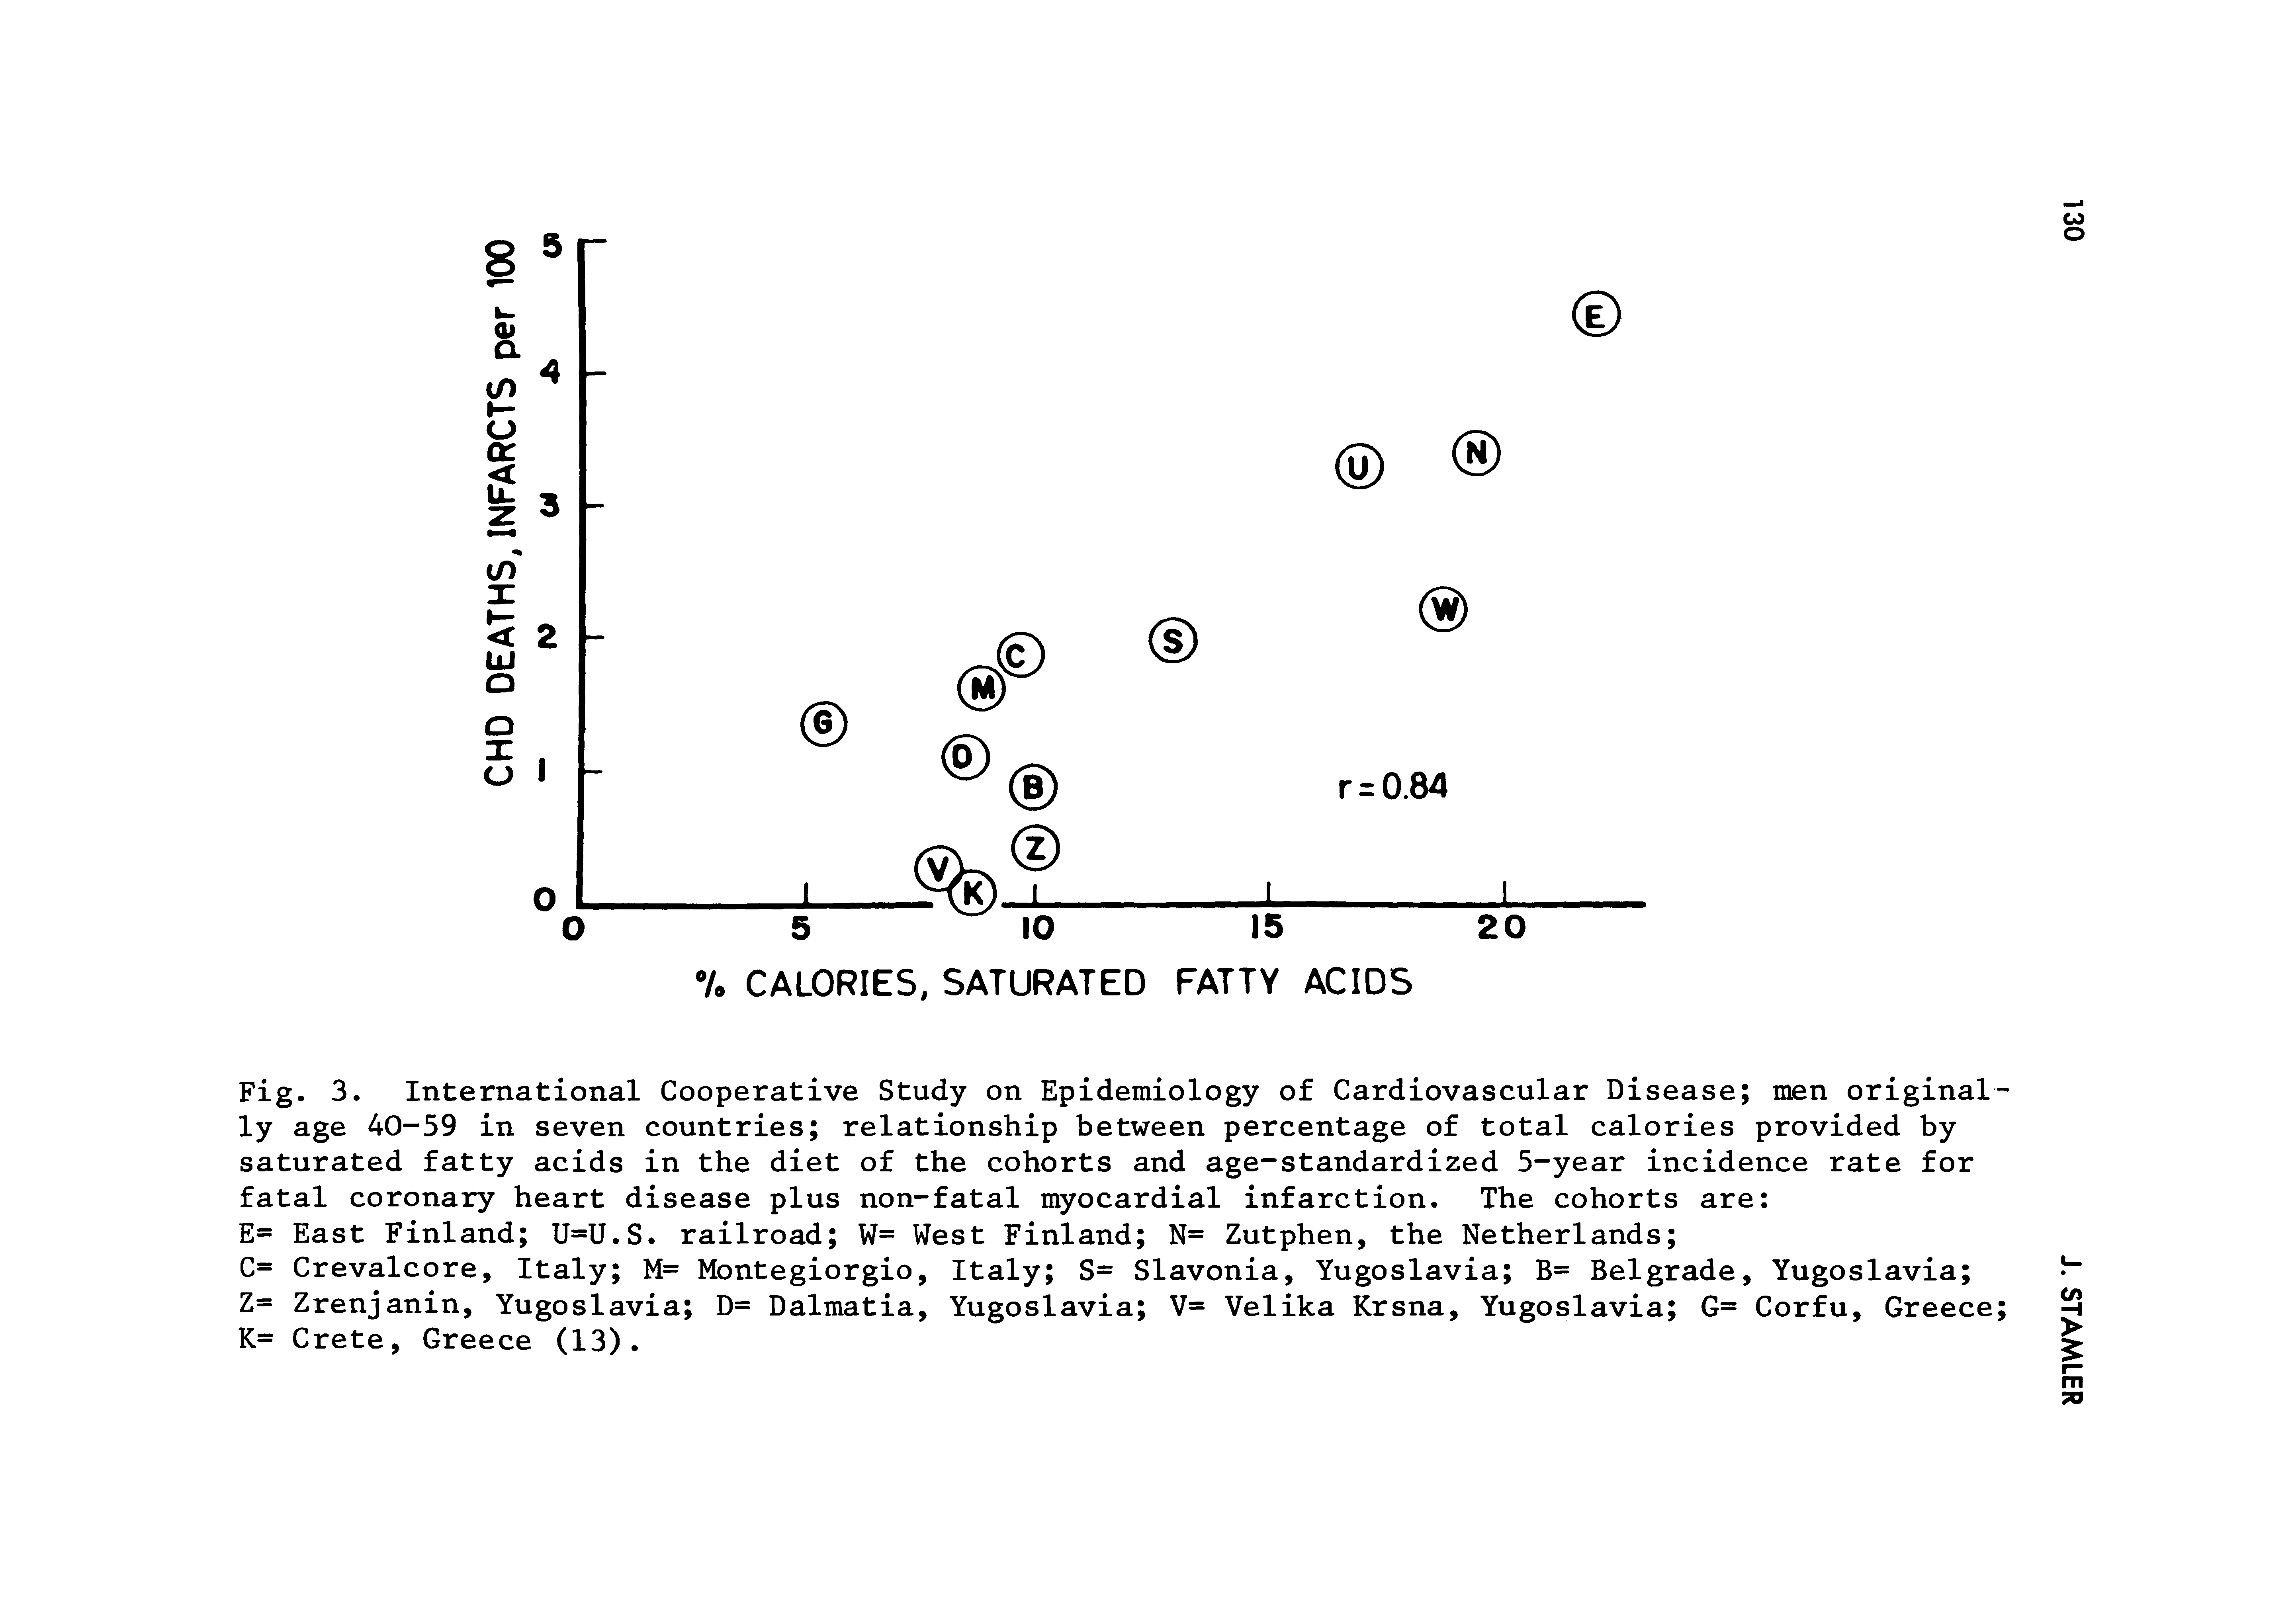 Fig. 3. International Cooperative Study on Epidemiology of Cardiovascular Disease men originally age 40-59 in seven countries relationship between percentage of total calories provided by saturated fatty acids in the diet of the cohorts and age-standardized 5-year incidence rate for fatal coronary heart disease plus non-fatal myocardial infarction. The cohorts are ...